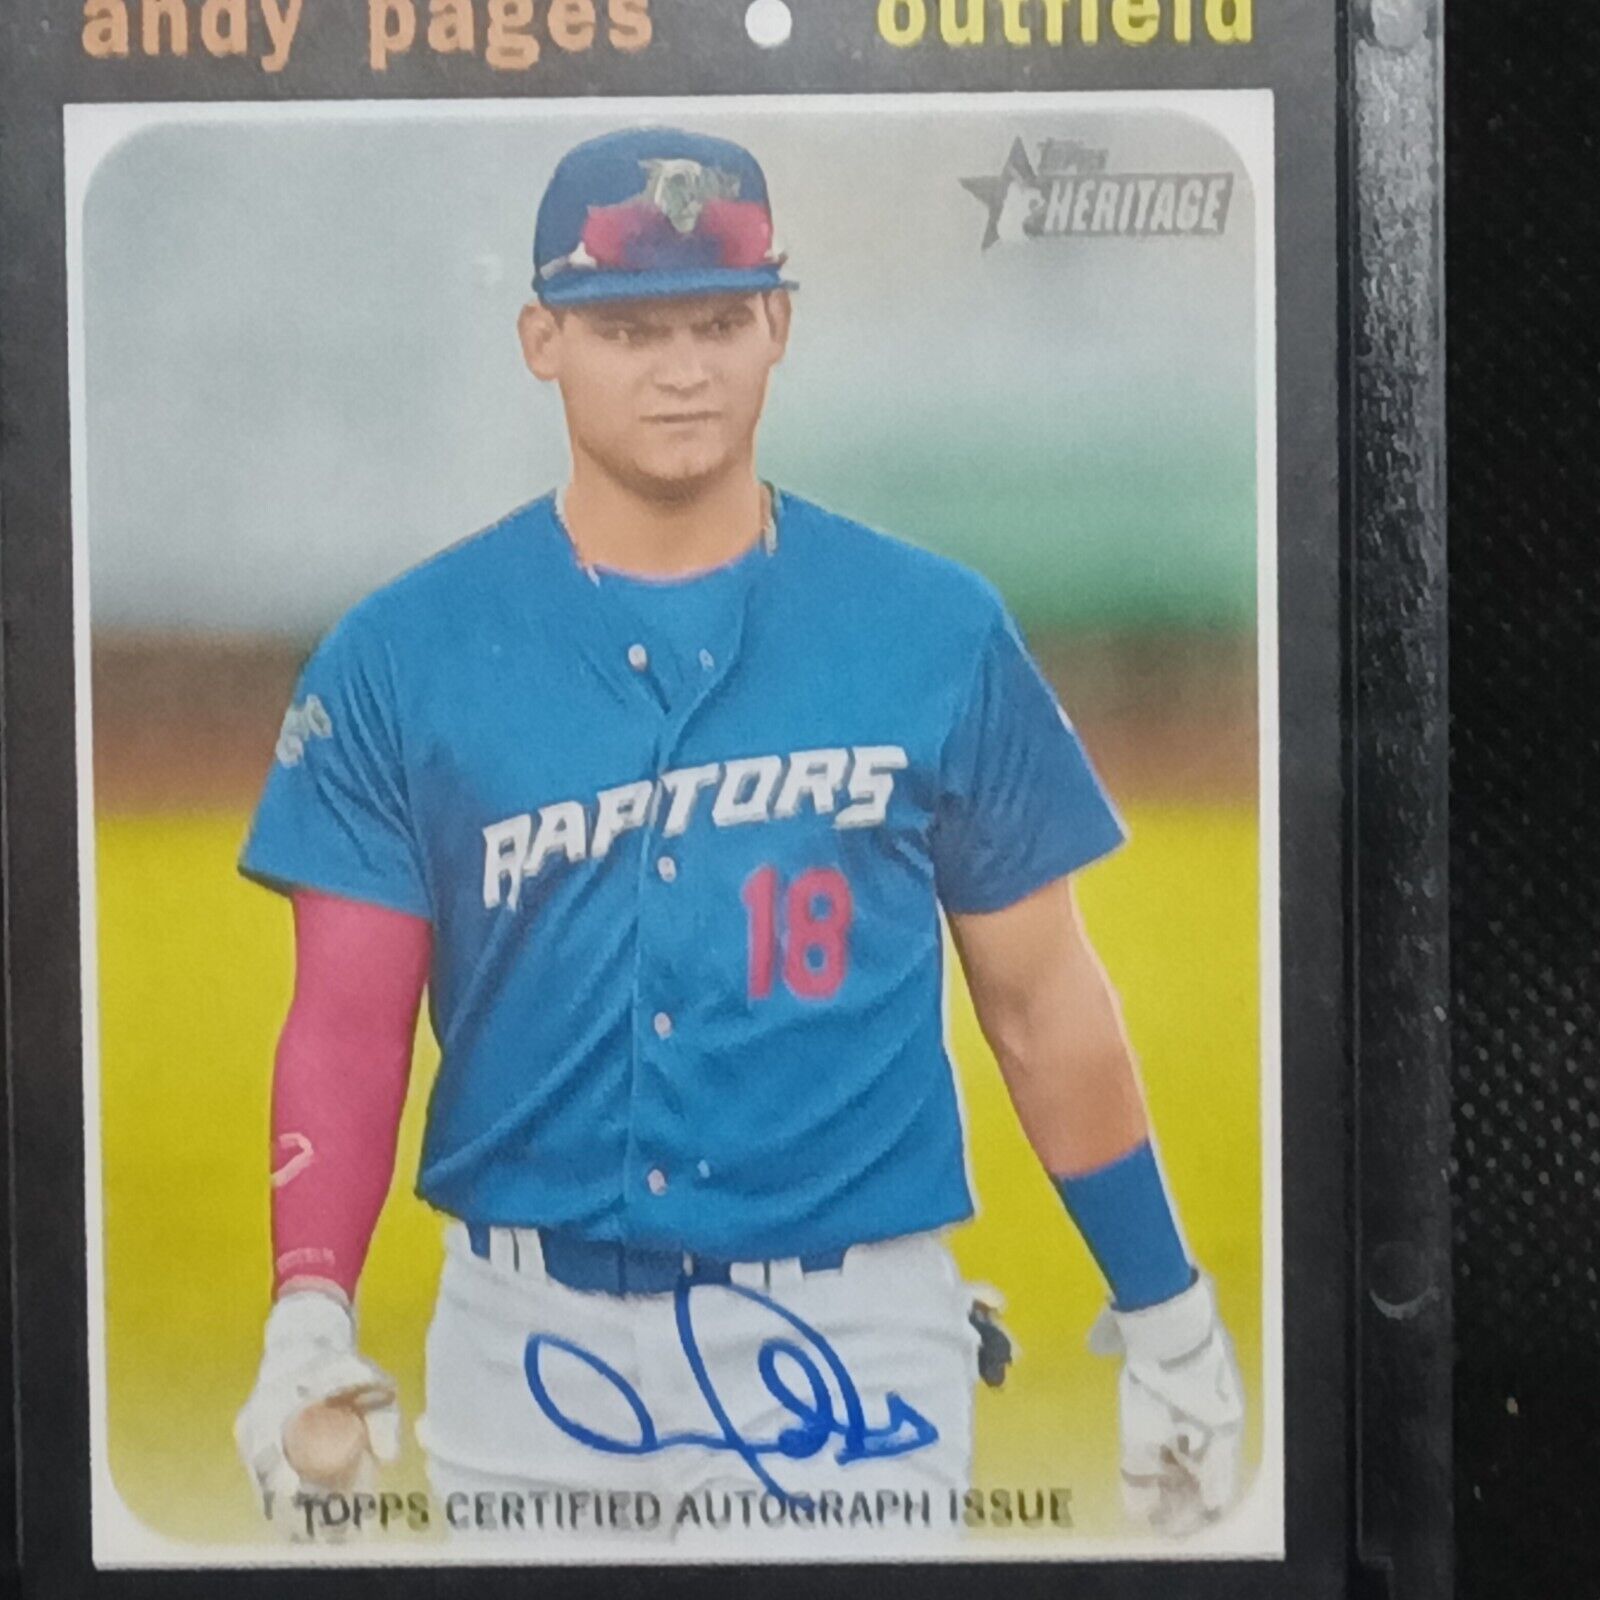 Andy Pages -- 2020 Topps Heritage Autographed Card